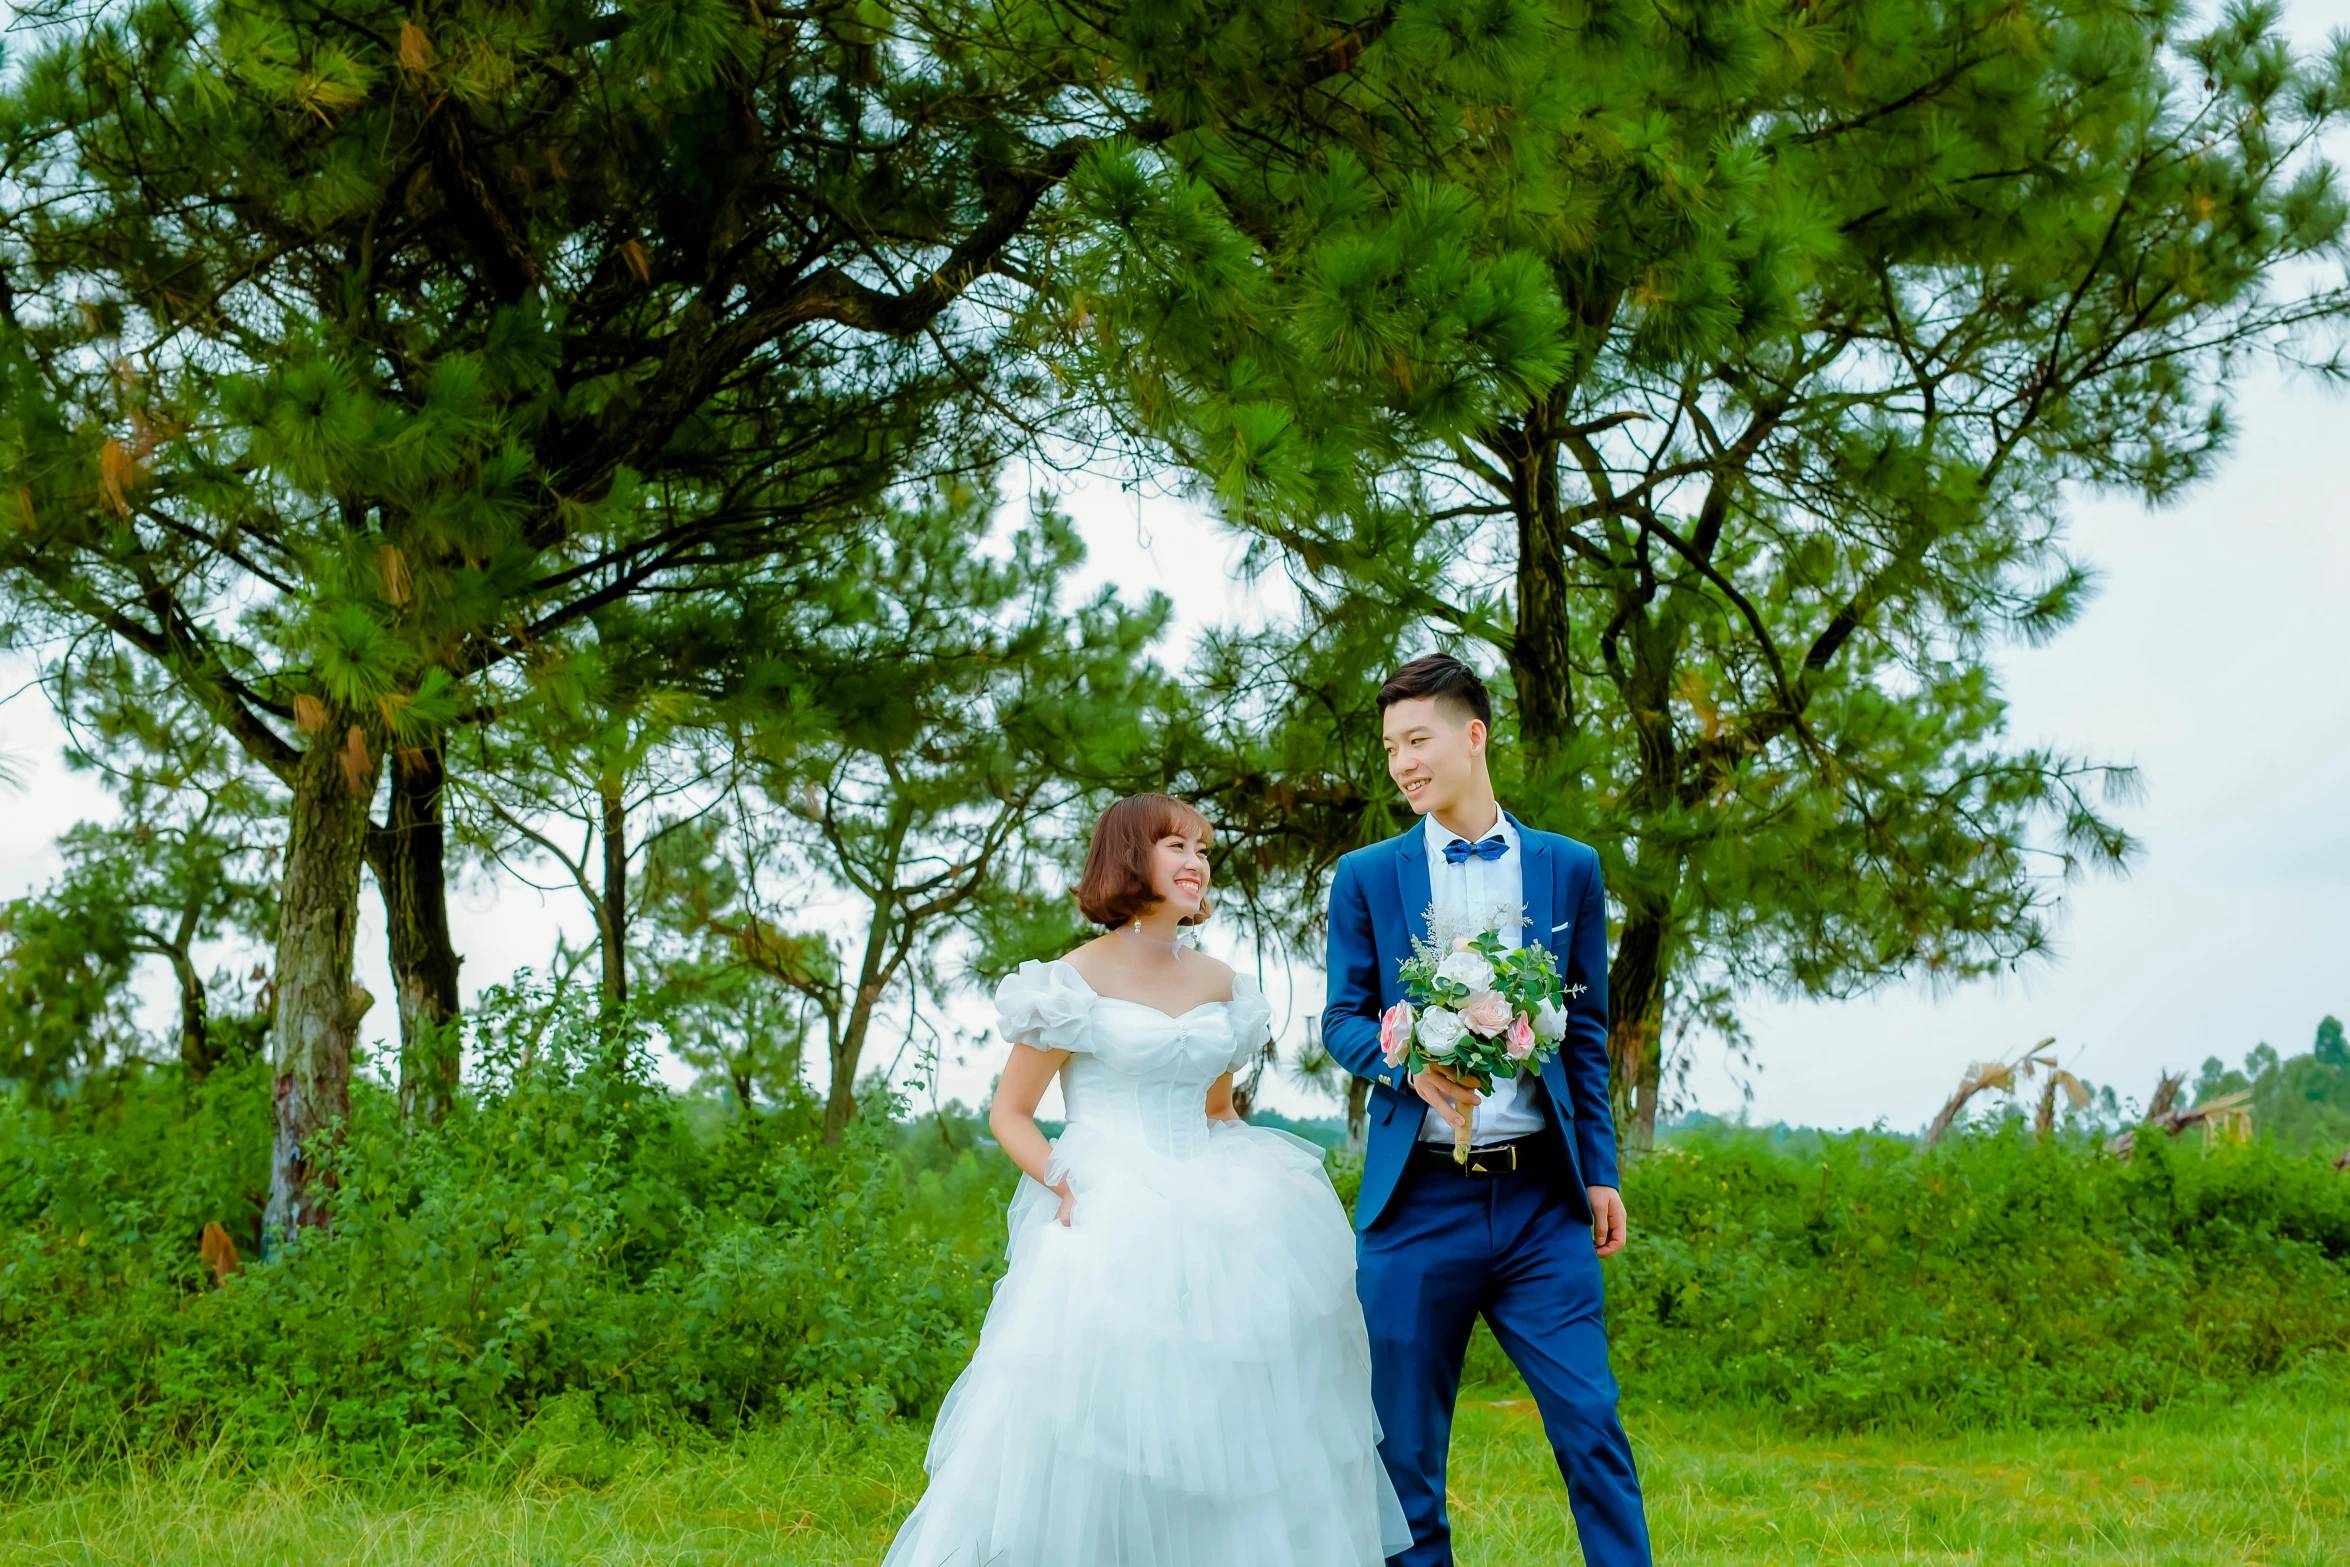 the bride and groom are standing together near a forest